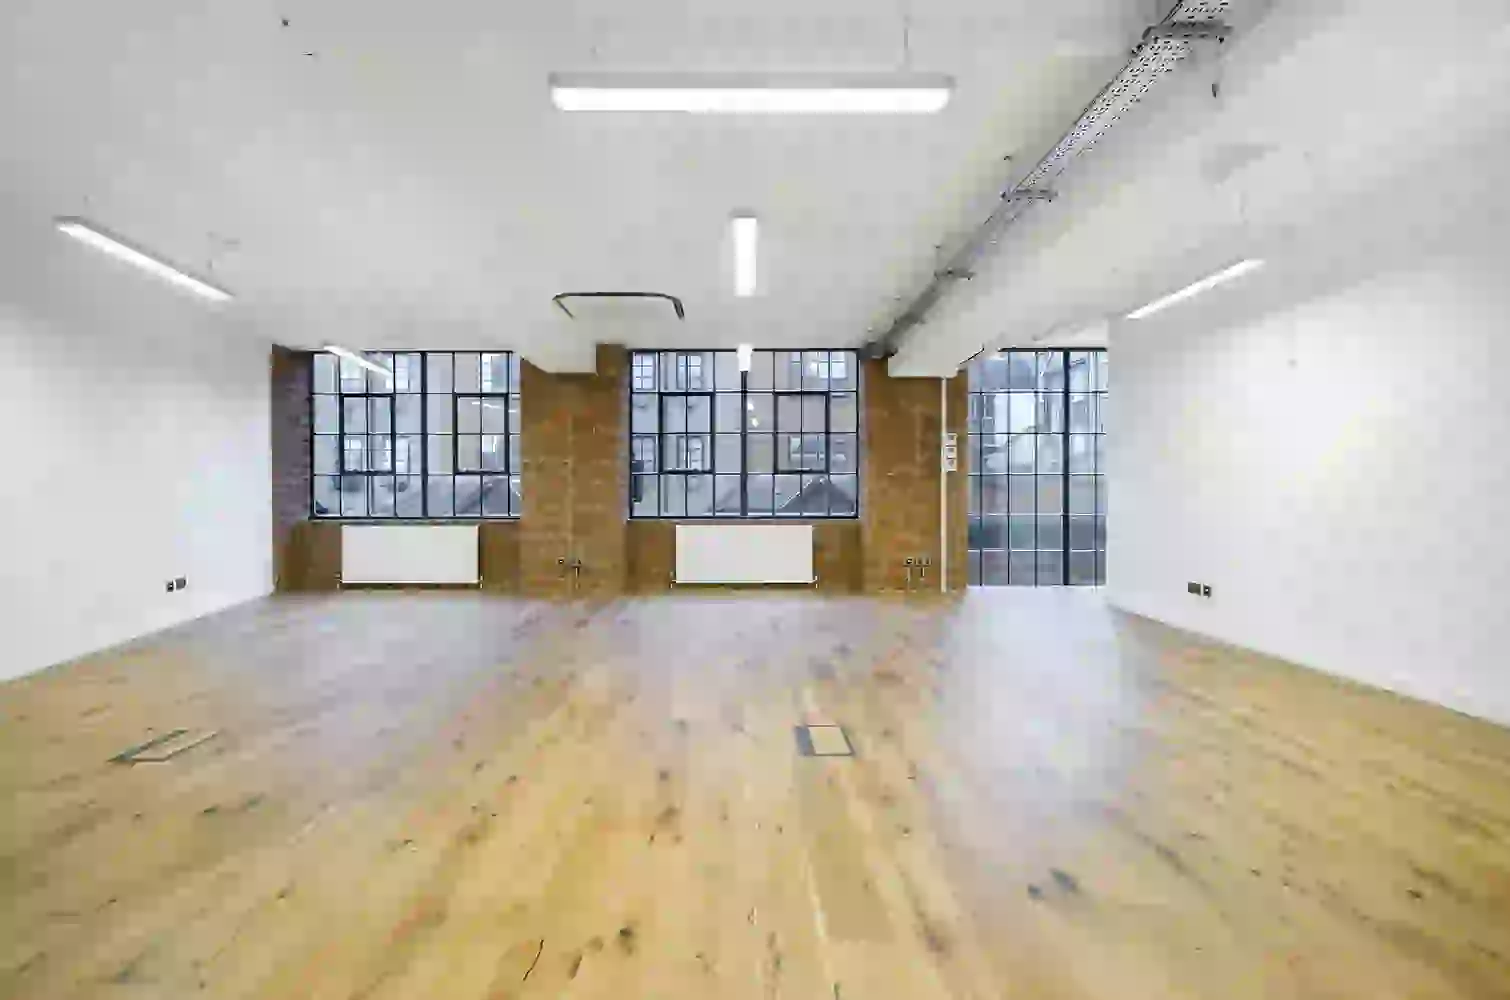 Office space to rent at Exmouth House, 3/11 Pine Street, Farringdon, London, unit EX.090, 1456 sq ft (135 sq m).